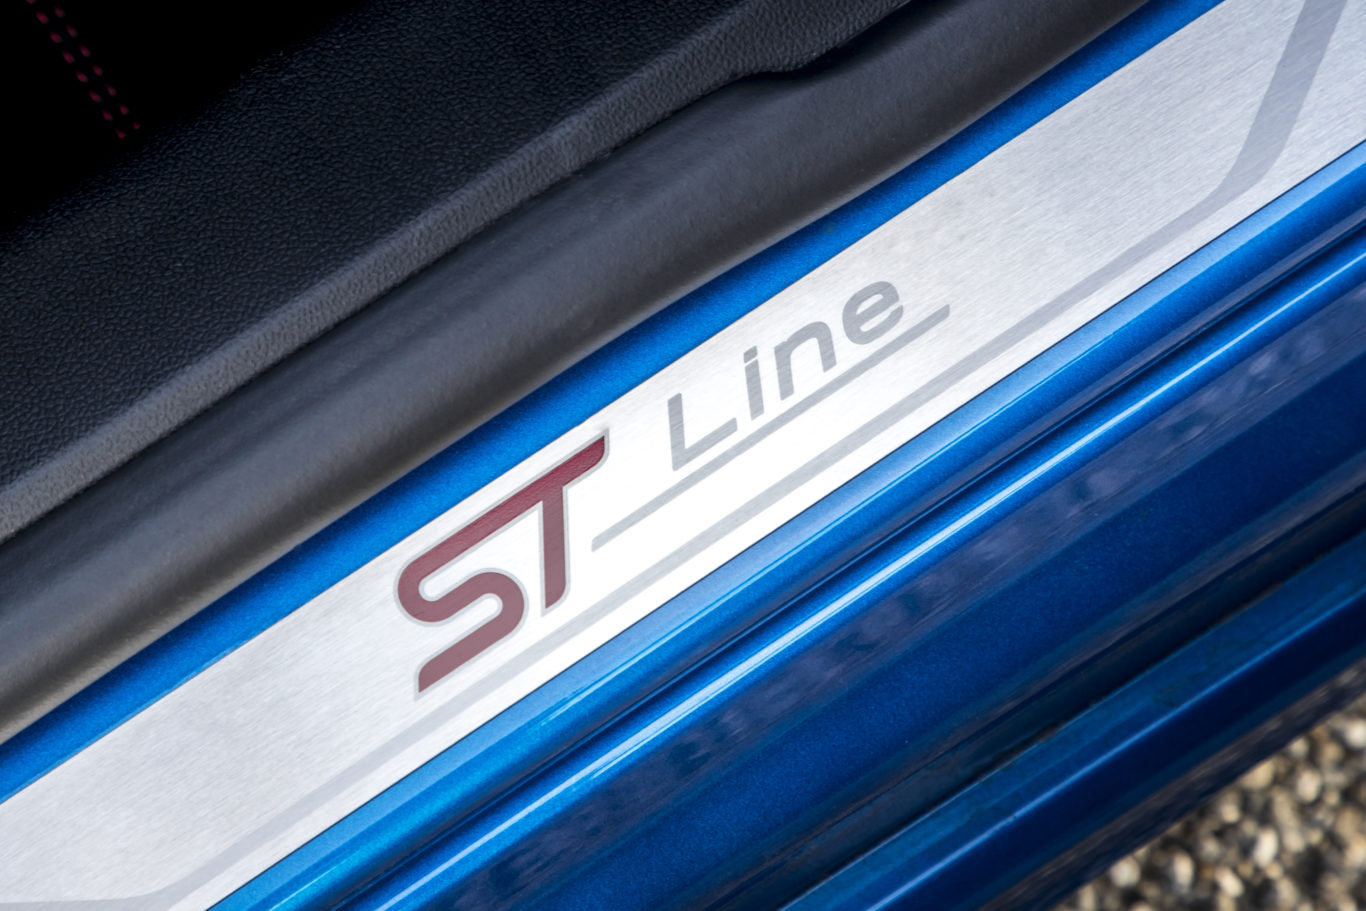 ST-Line vehicles benefit from a lot of standard equipment